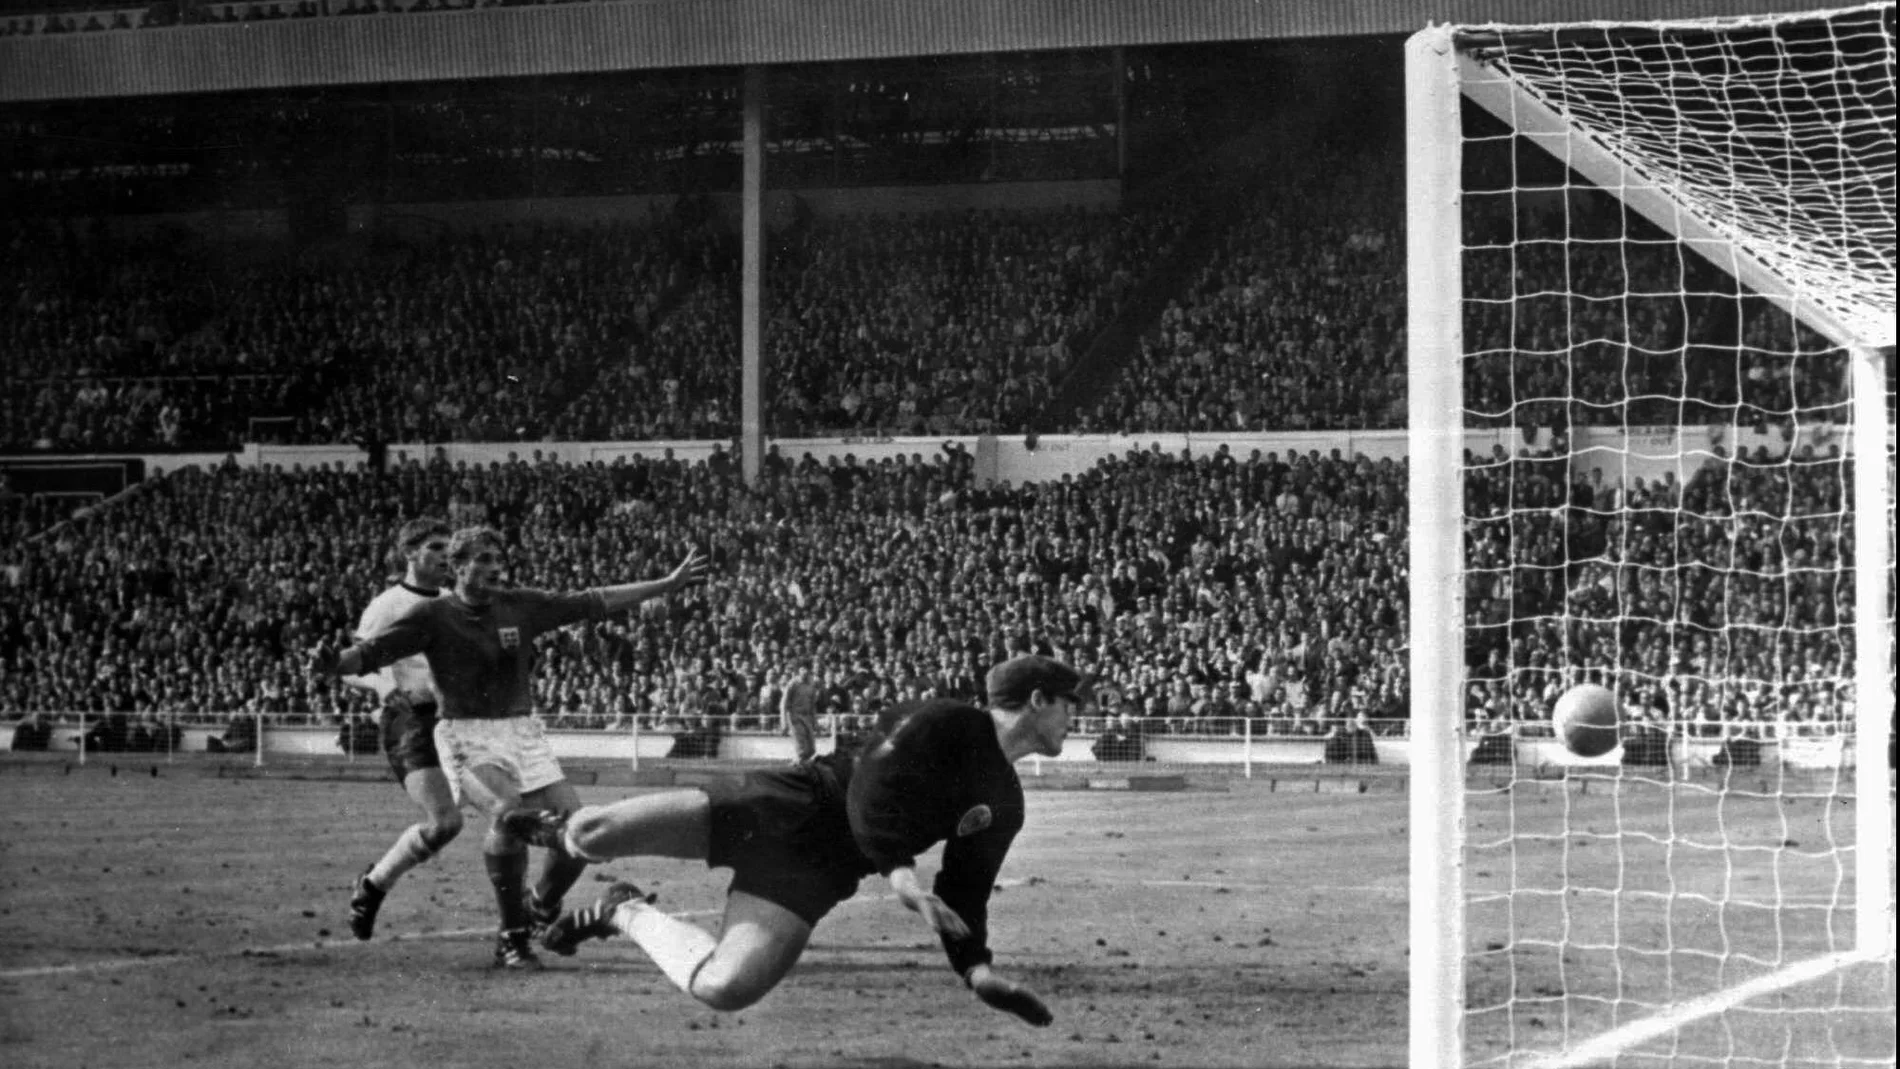 FILE - In this July 30, 1966 file photo, a shot from Geoff Hurst bounces down from the West Germany crossbar during the World Cup final at London's Wembley Stadium. The linesman gave it as a goal and England went to to win 4-2. England won its only World Cup title by beating West Germany in London in a match that produced an enduring moment of controversy that is still the subject of debate. In extra time with the scored even at 2-2, Alan Ball crossed to England teammate Geoff Hurst, who turned and shot. The ball thumped down from the underside of the West German crossbar and Roger Hunt raised his arms to proclaim the ball bounced over the goal line. (AP Photo/File)